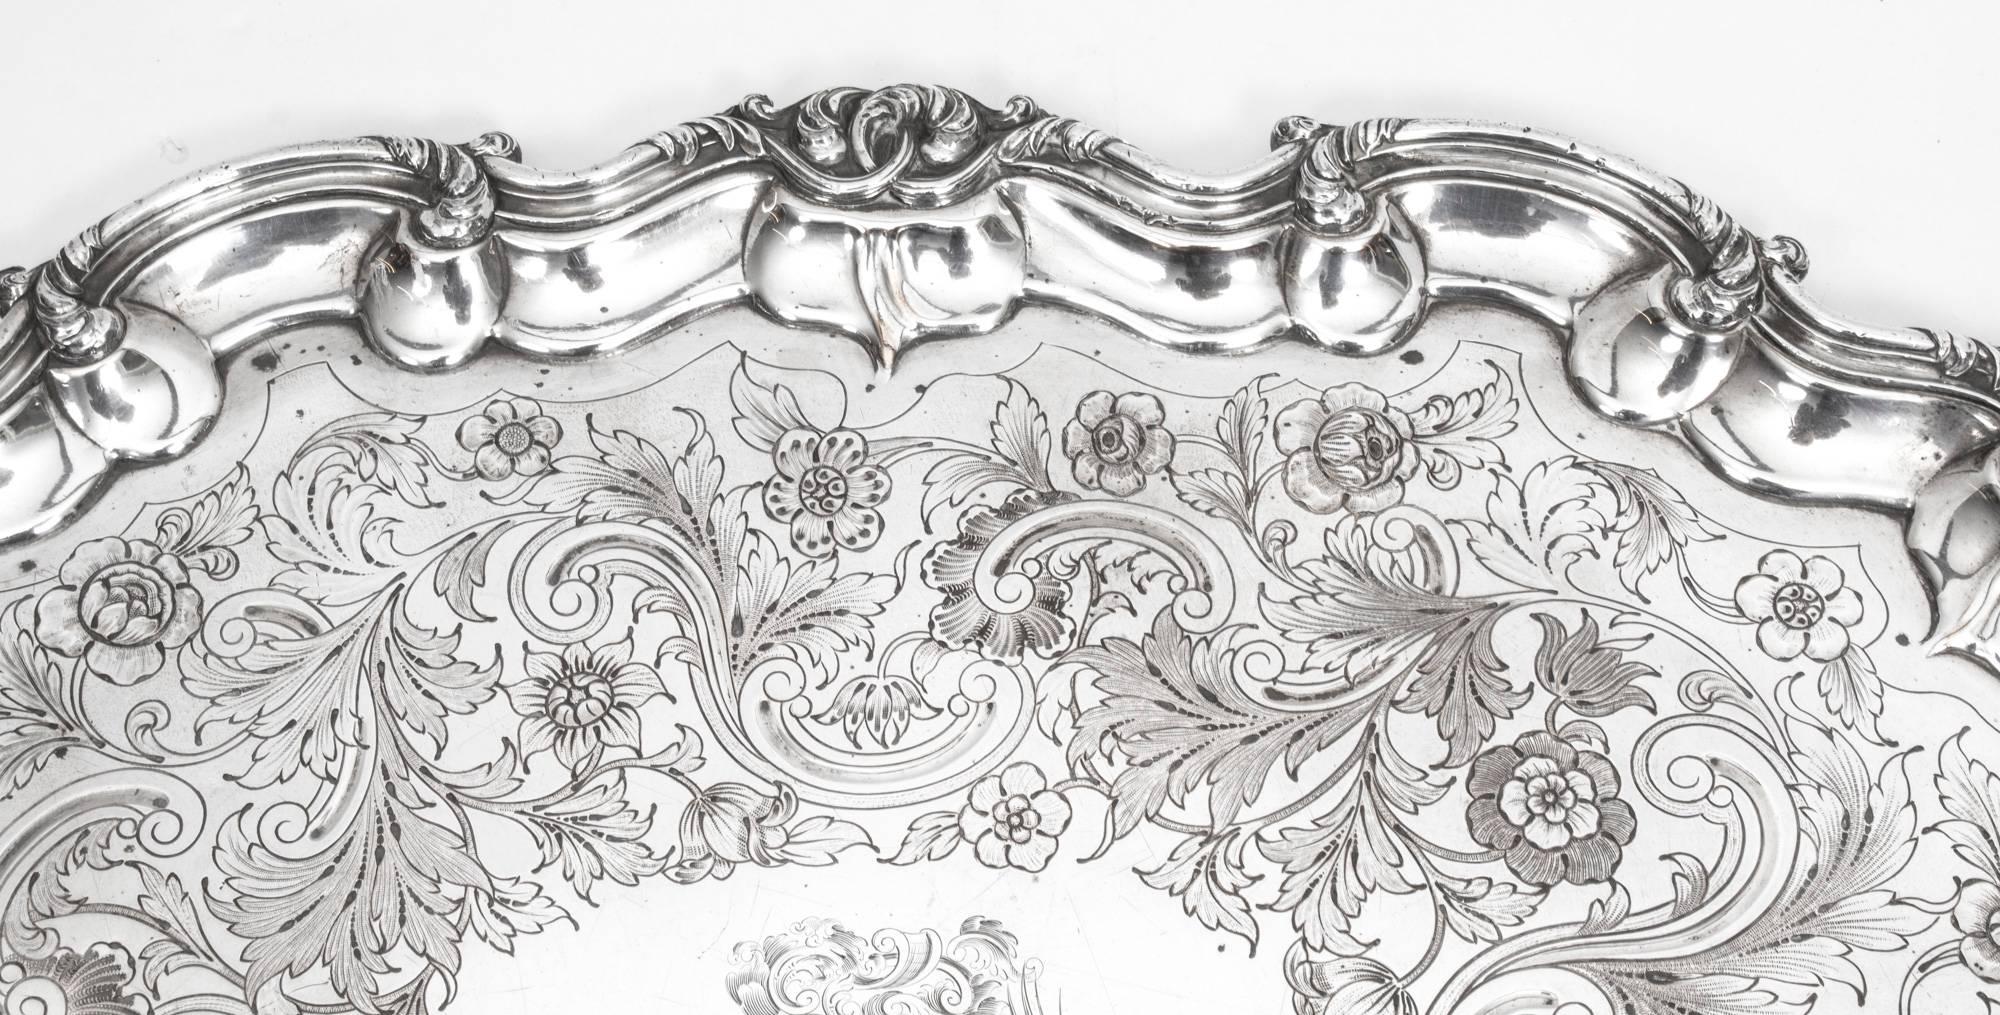 This is an exceptional antique English old Sheffield plate shaped oval tray with a beautiful foliate border, circa 1811 in date.

Bearing the makers marks of Cresswick & Co, fabulous foliate engraved decoration and a central crest.

This